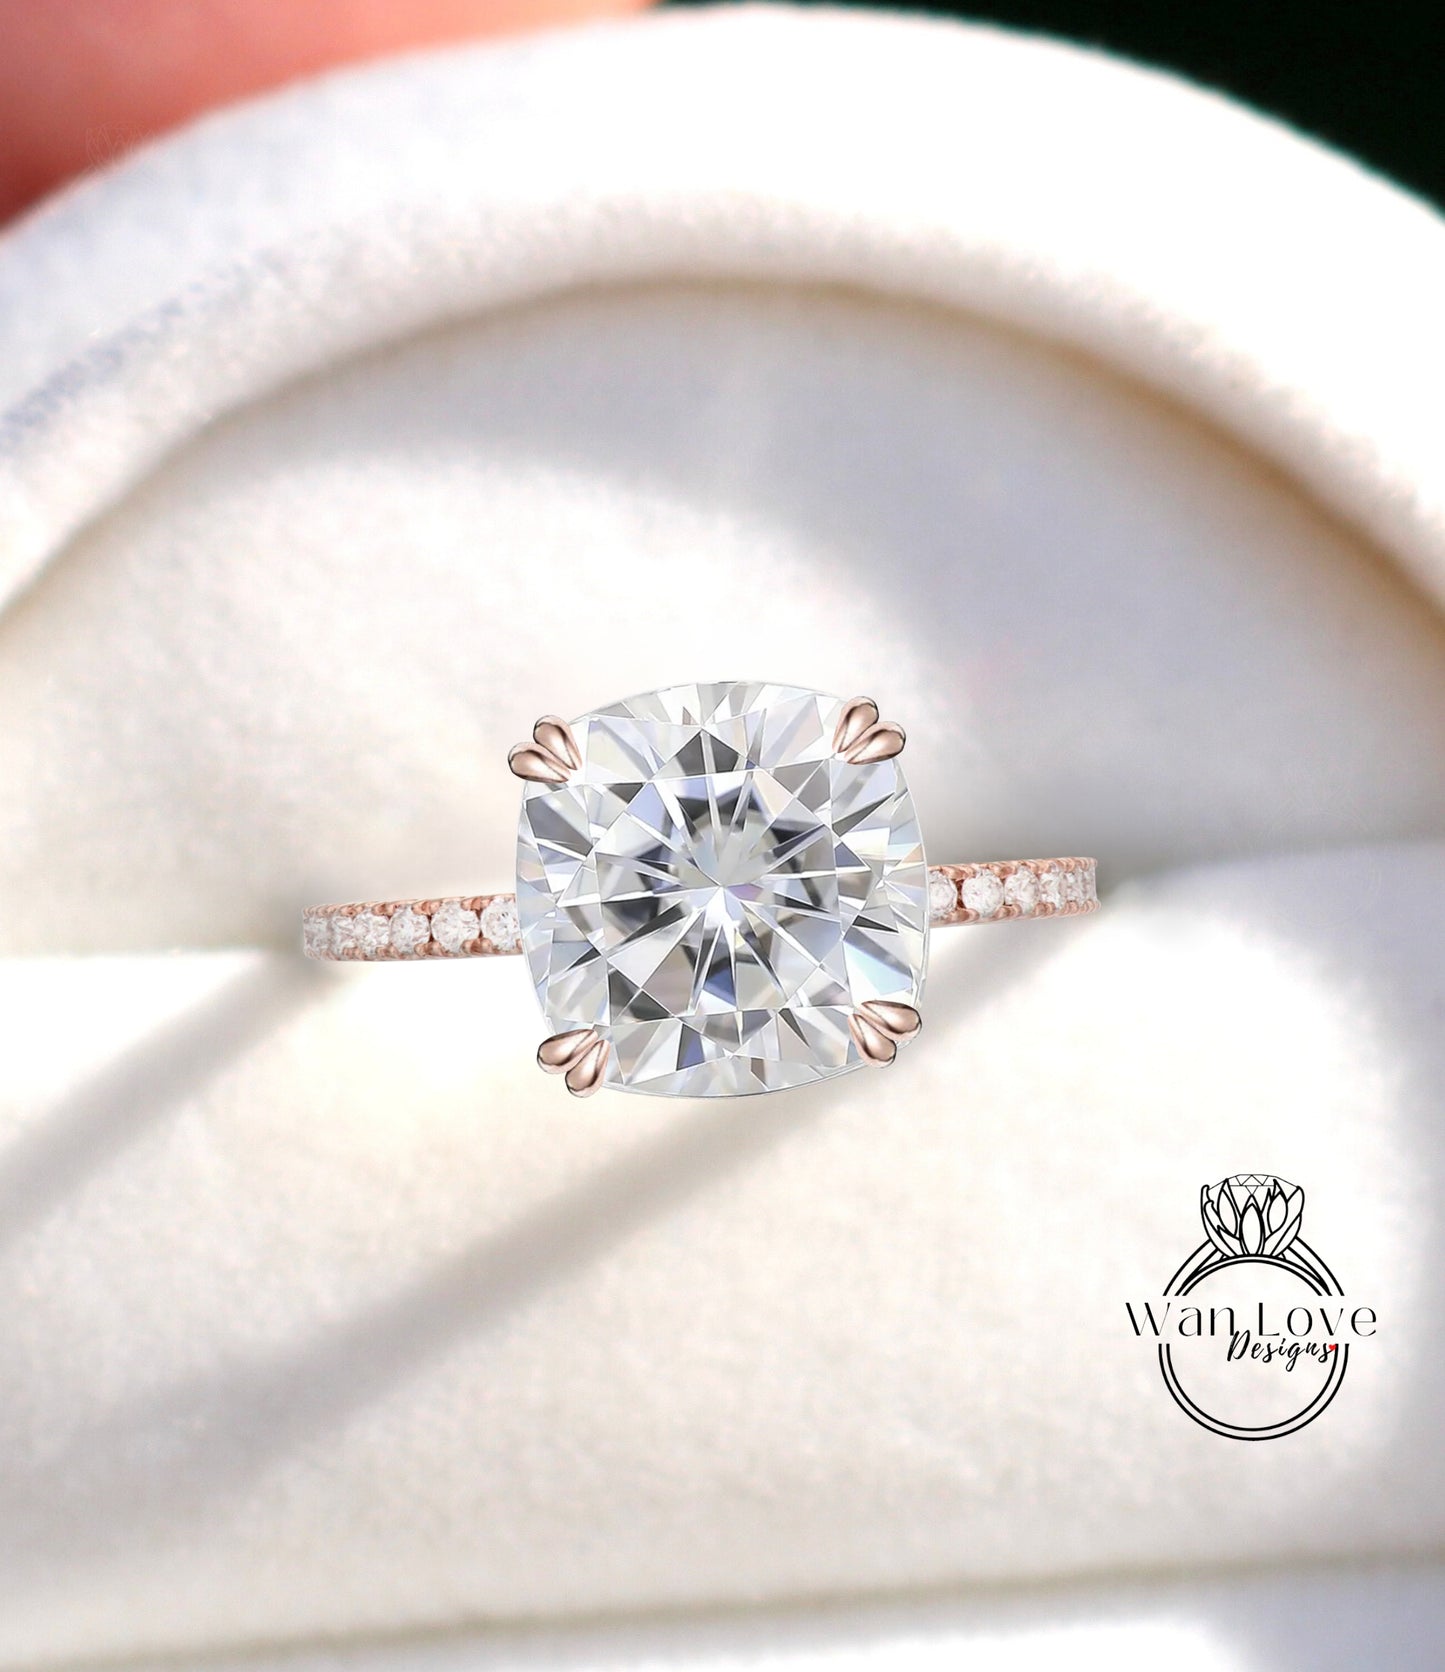 DEF Moissanite Engagement Ring Cushion cut Diamonds 14K 18K Rose gold vintage ring Antique Solitaire ring Anniversary Promise wedding ring